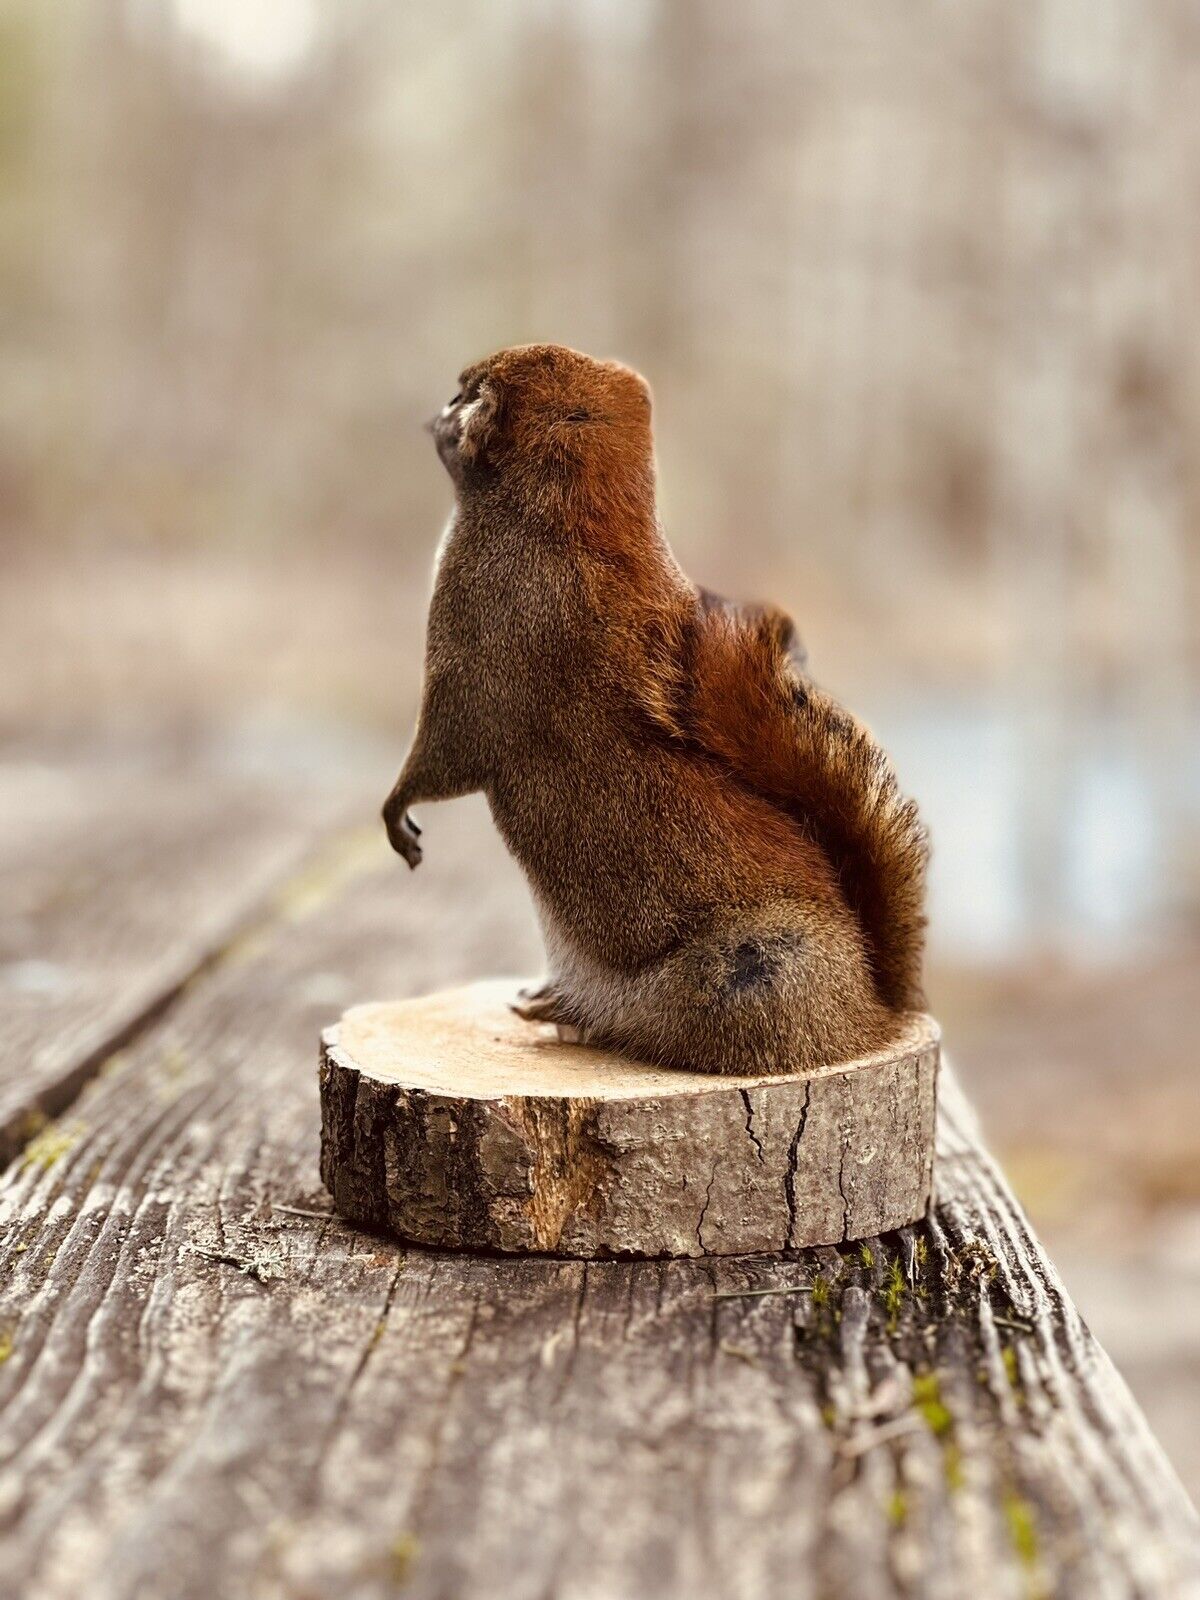 Beautiful Adorable Red Squirrel Small Animal Taxidermy Mount Art Wildlife